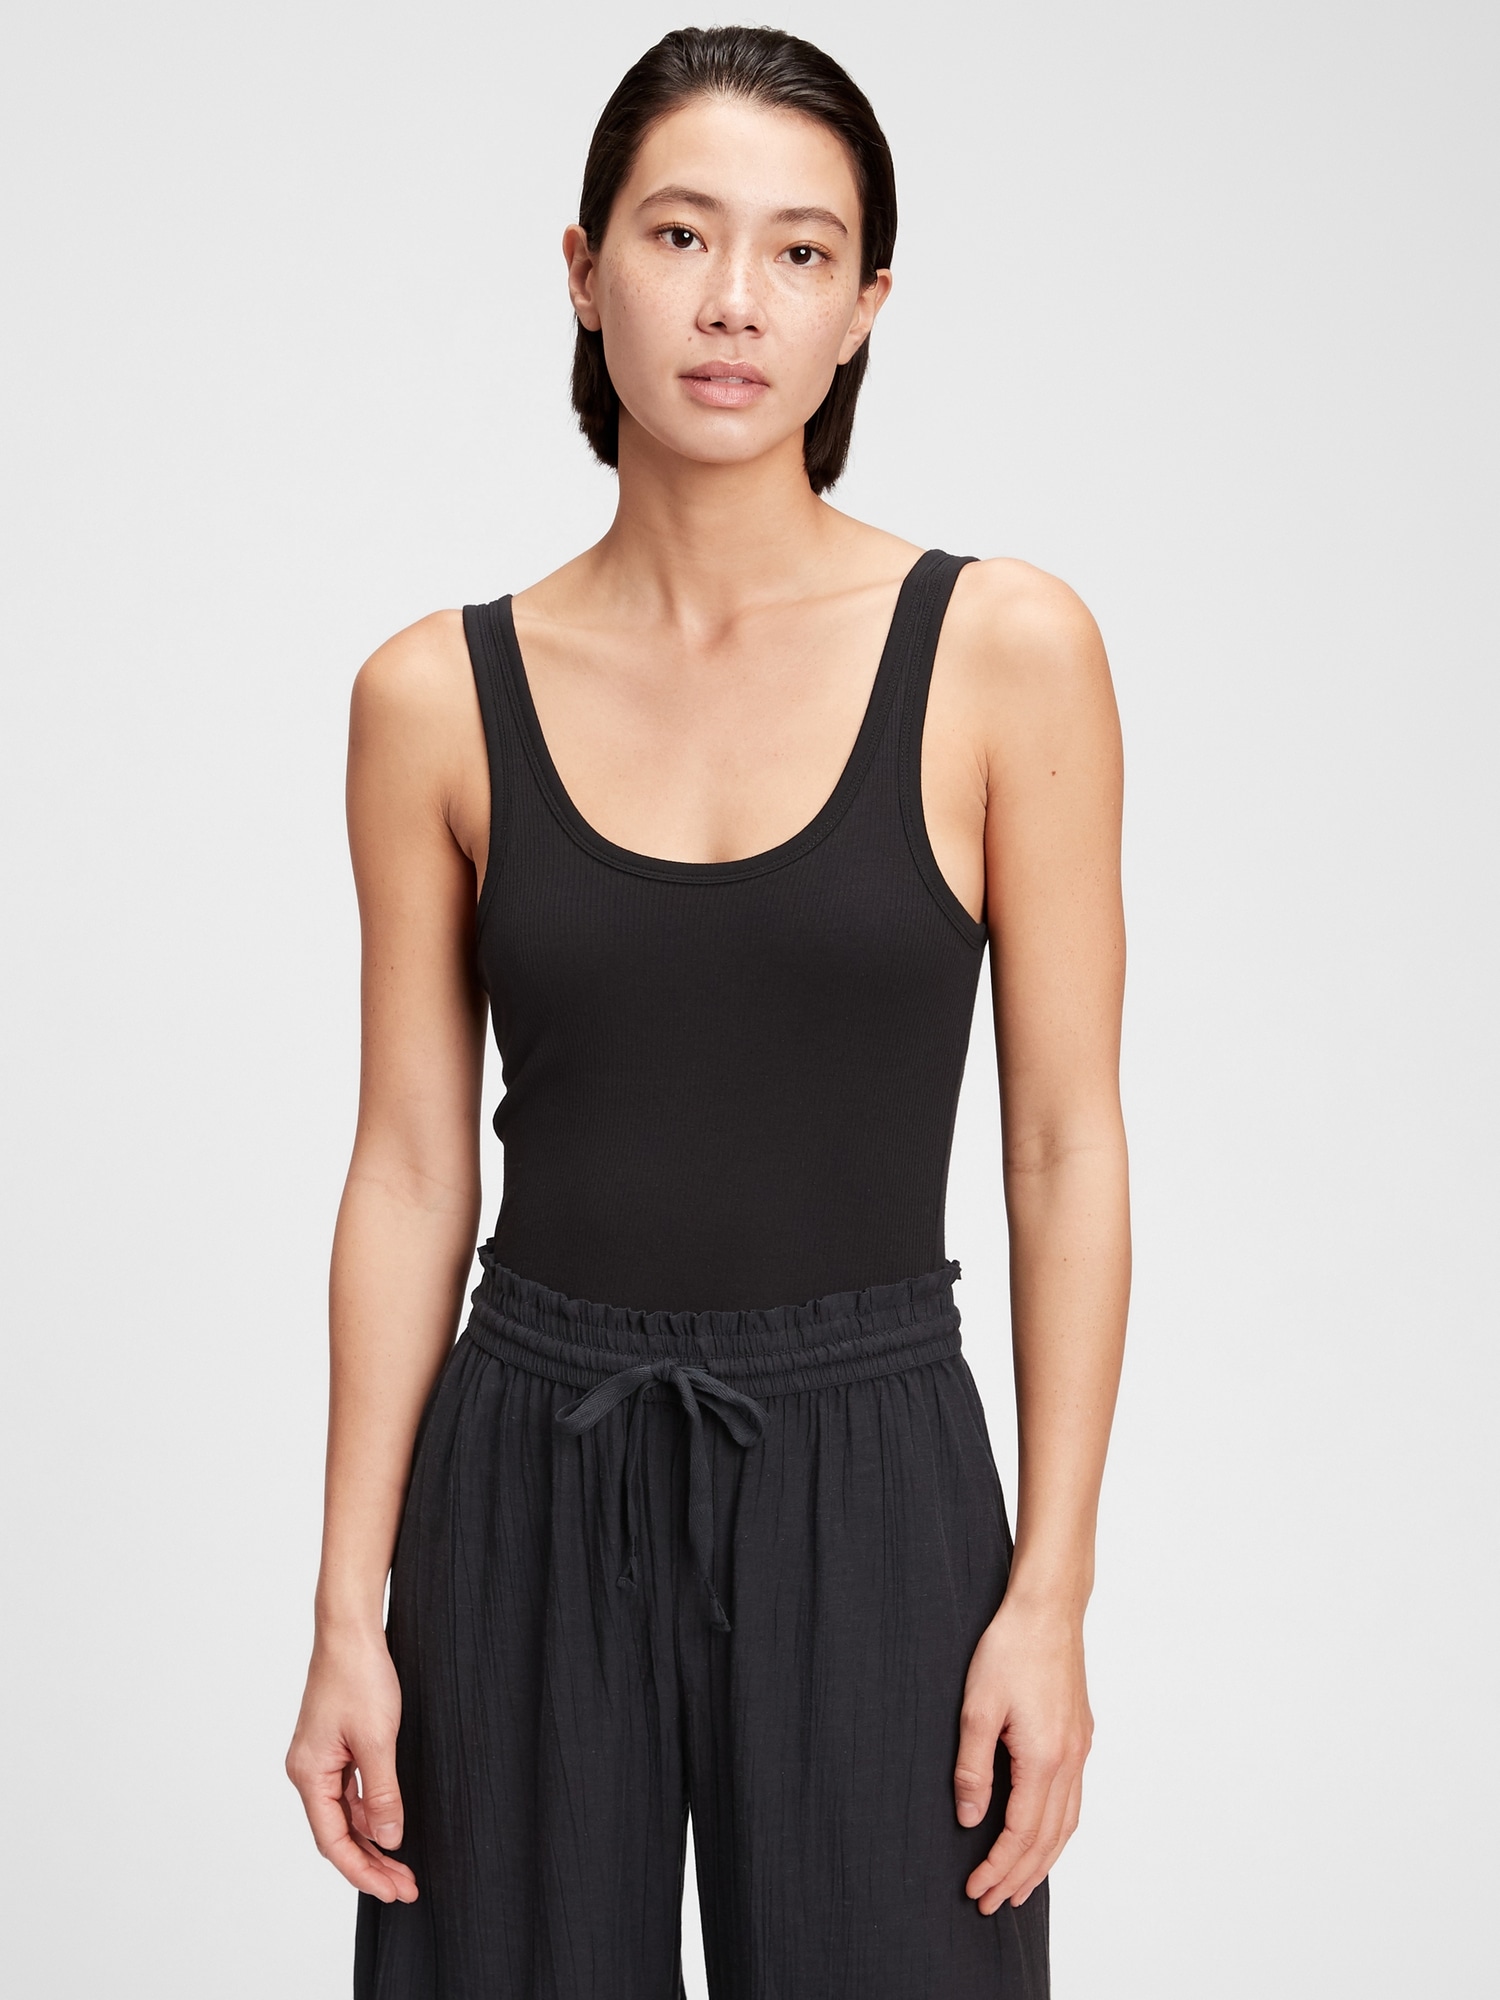 This J.Crew Shelf-Bra Tank Top Is Comfortable and Supportive